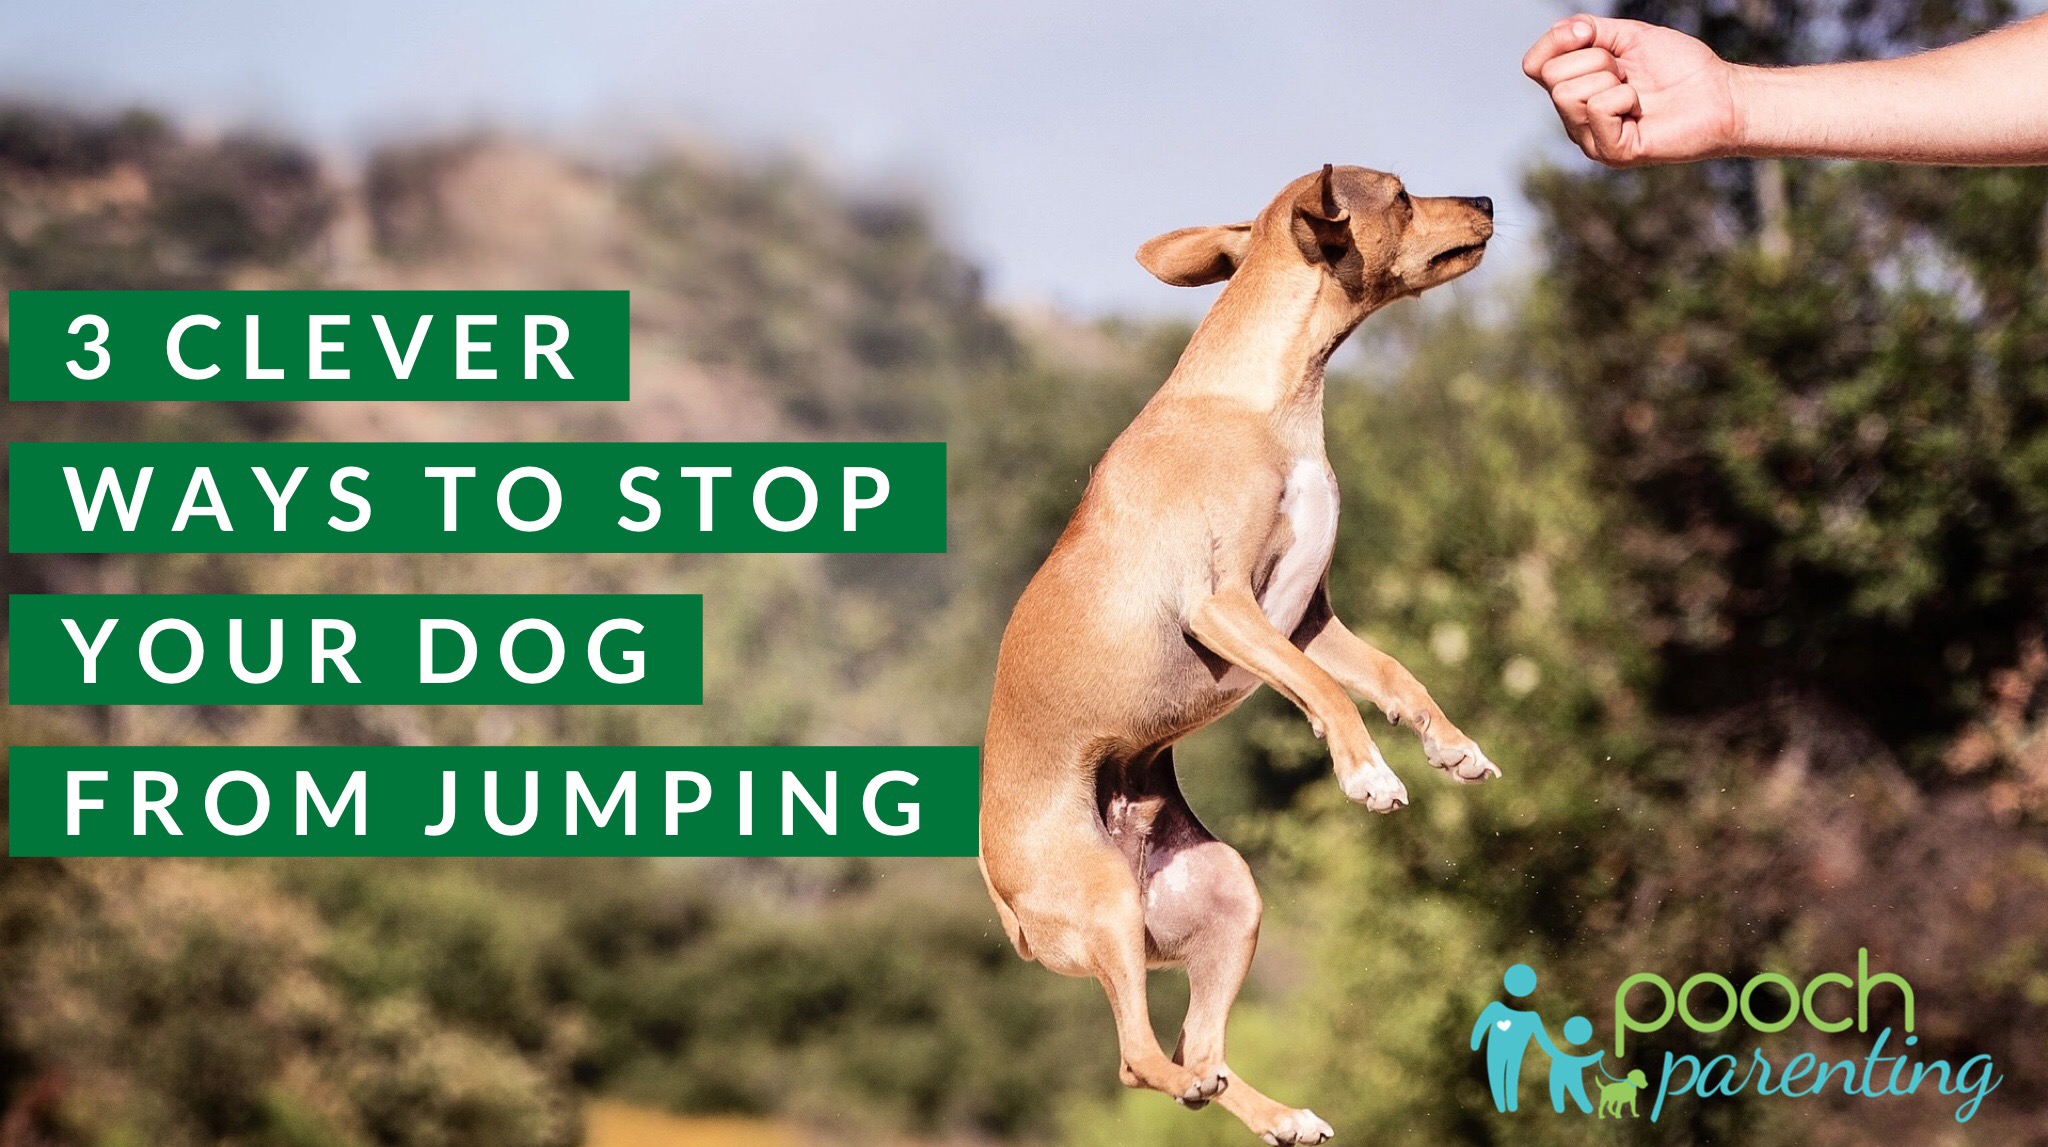 My dog can jump. Dog is jumping. Dog Jumps up. How to stop a Dog from jumping. How to stop a Dog from jumping up on you.